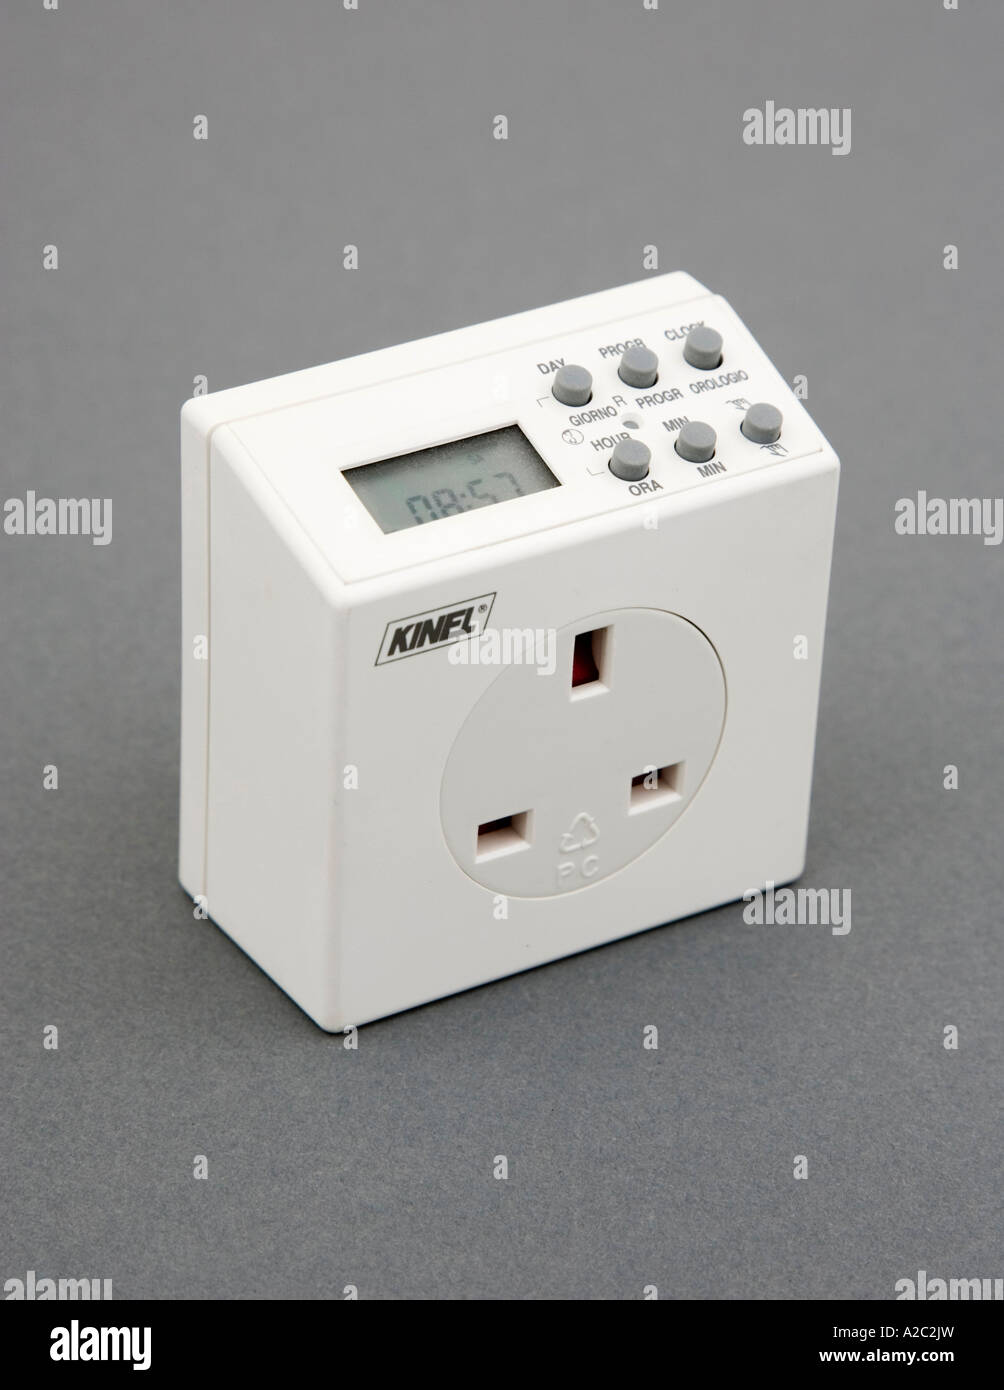 240 volt mains power socket with digital timer Stock Photo